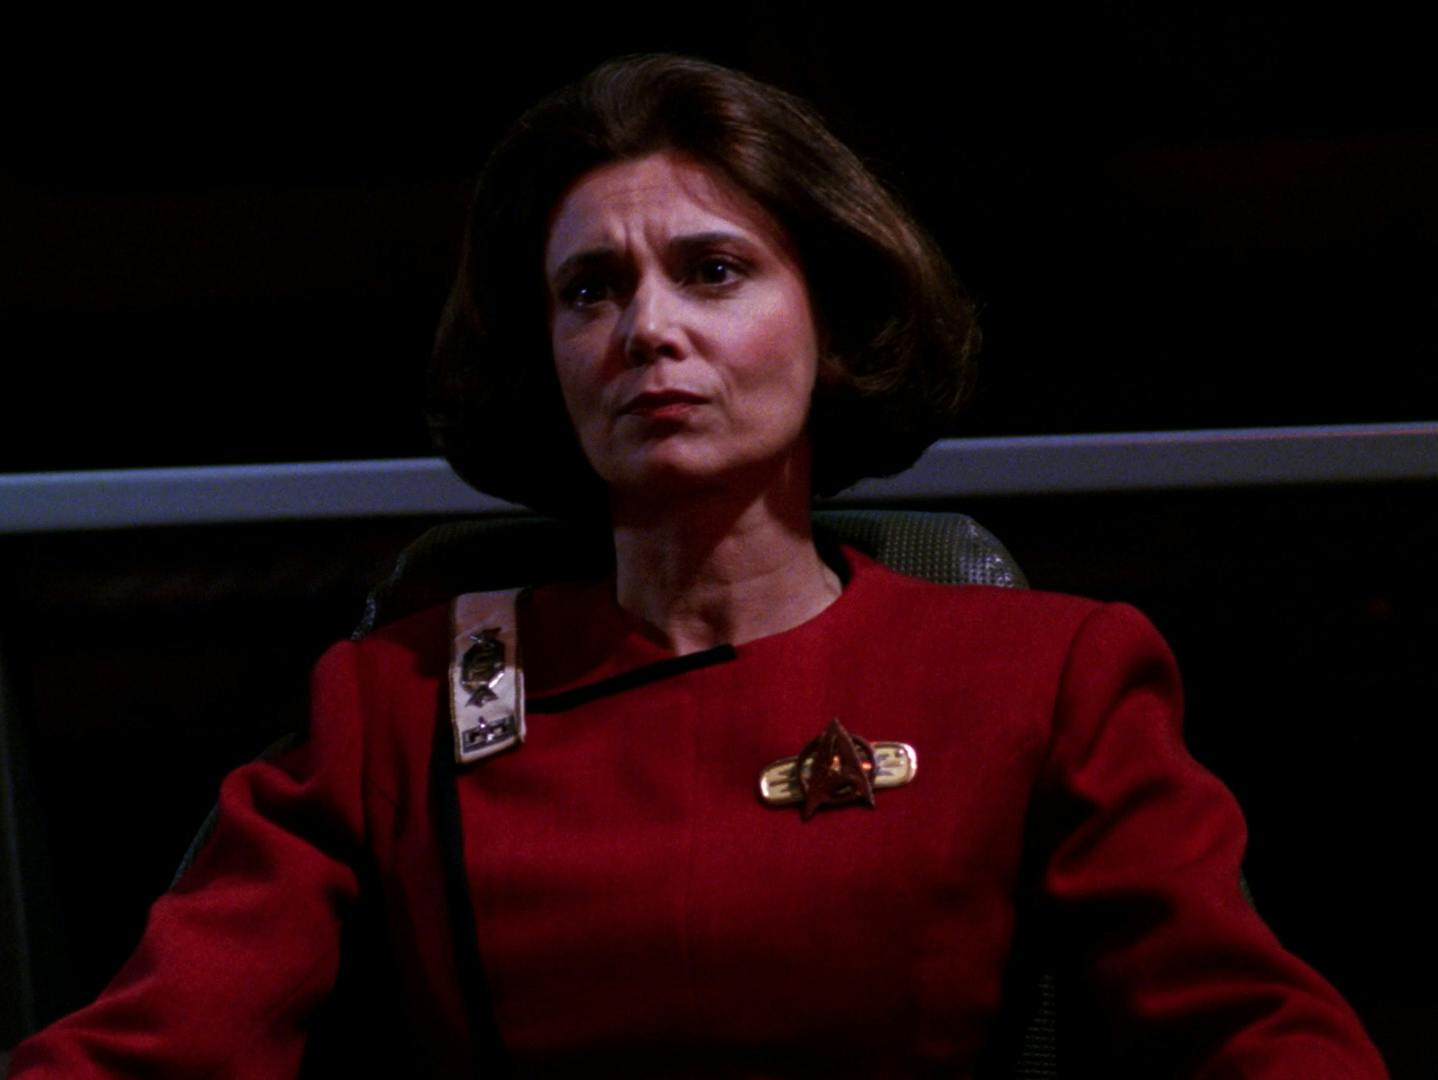 With a stern expression, Captain Rachel Garrett sits in the command seat aboard her ship the Enterprise-C in 'Yesterday's Enterprise'